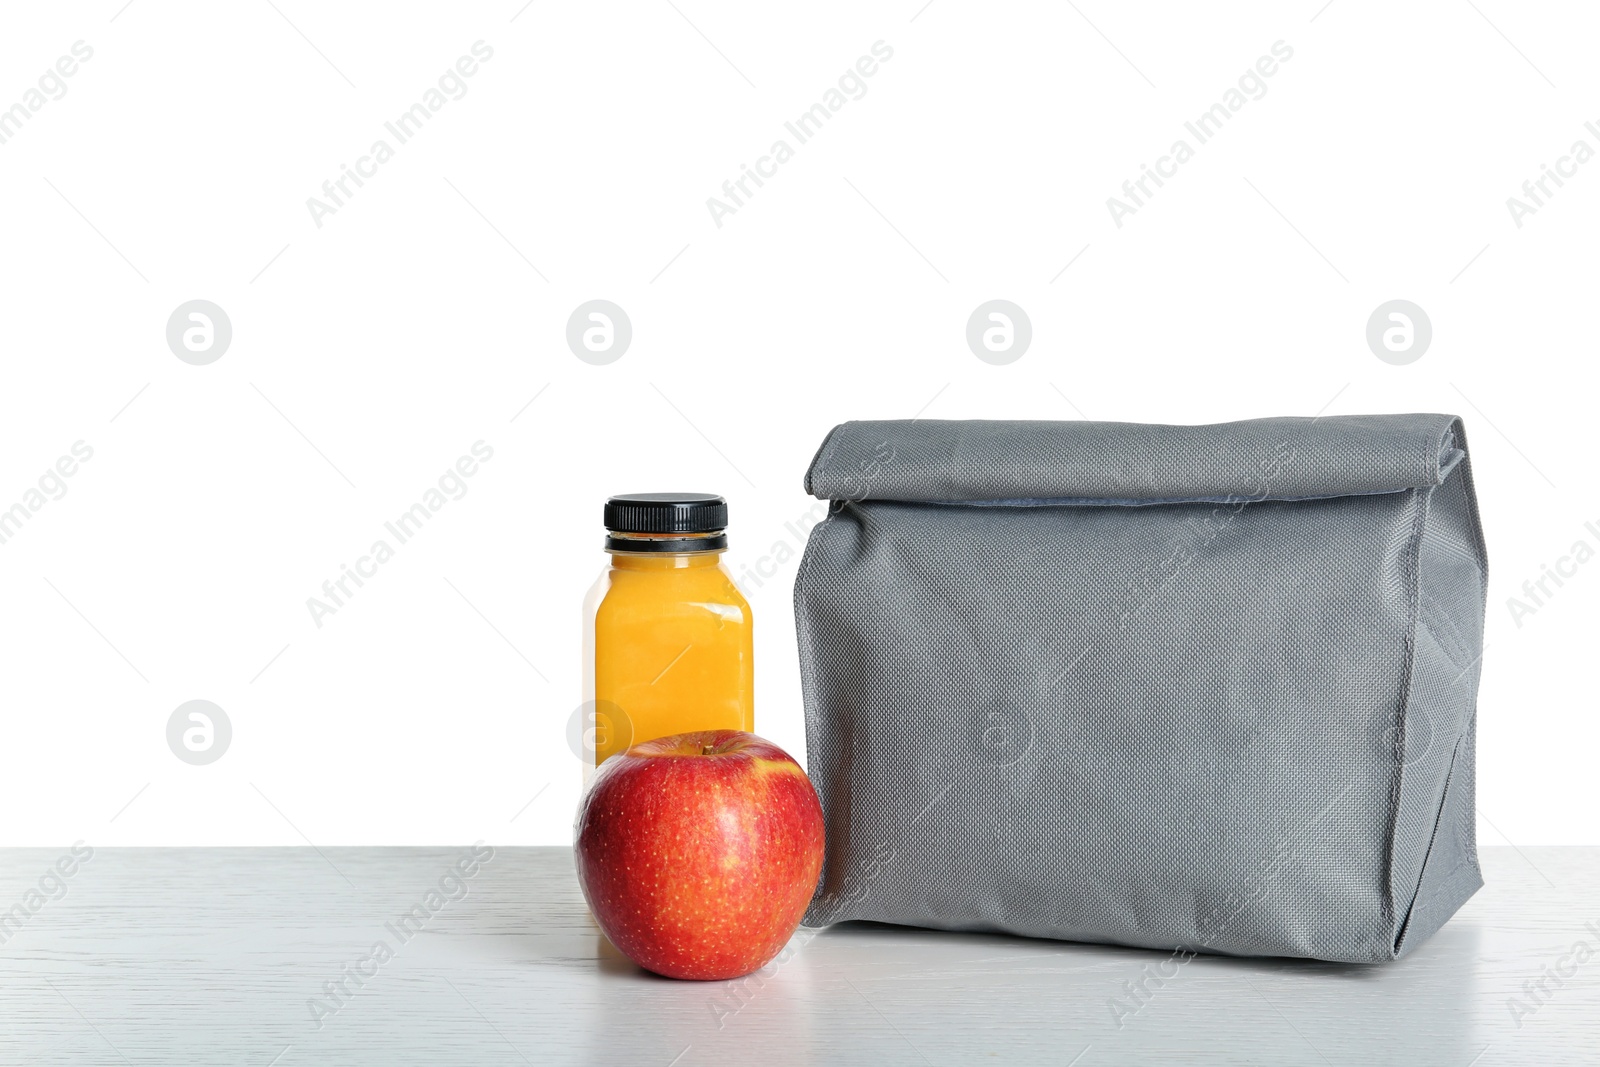 Photo of Healthy food and bag on table against white background. School lunch